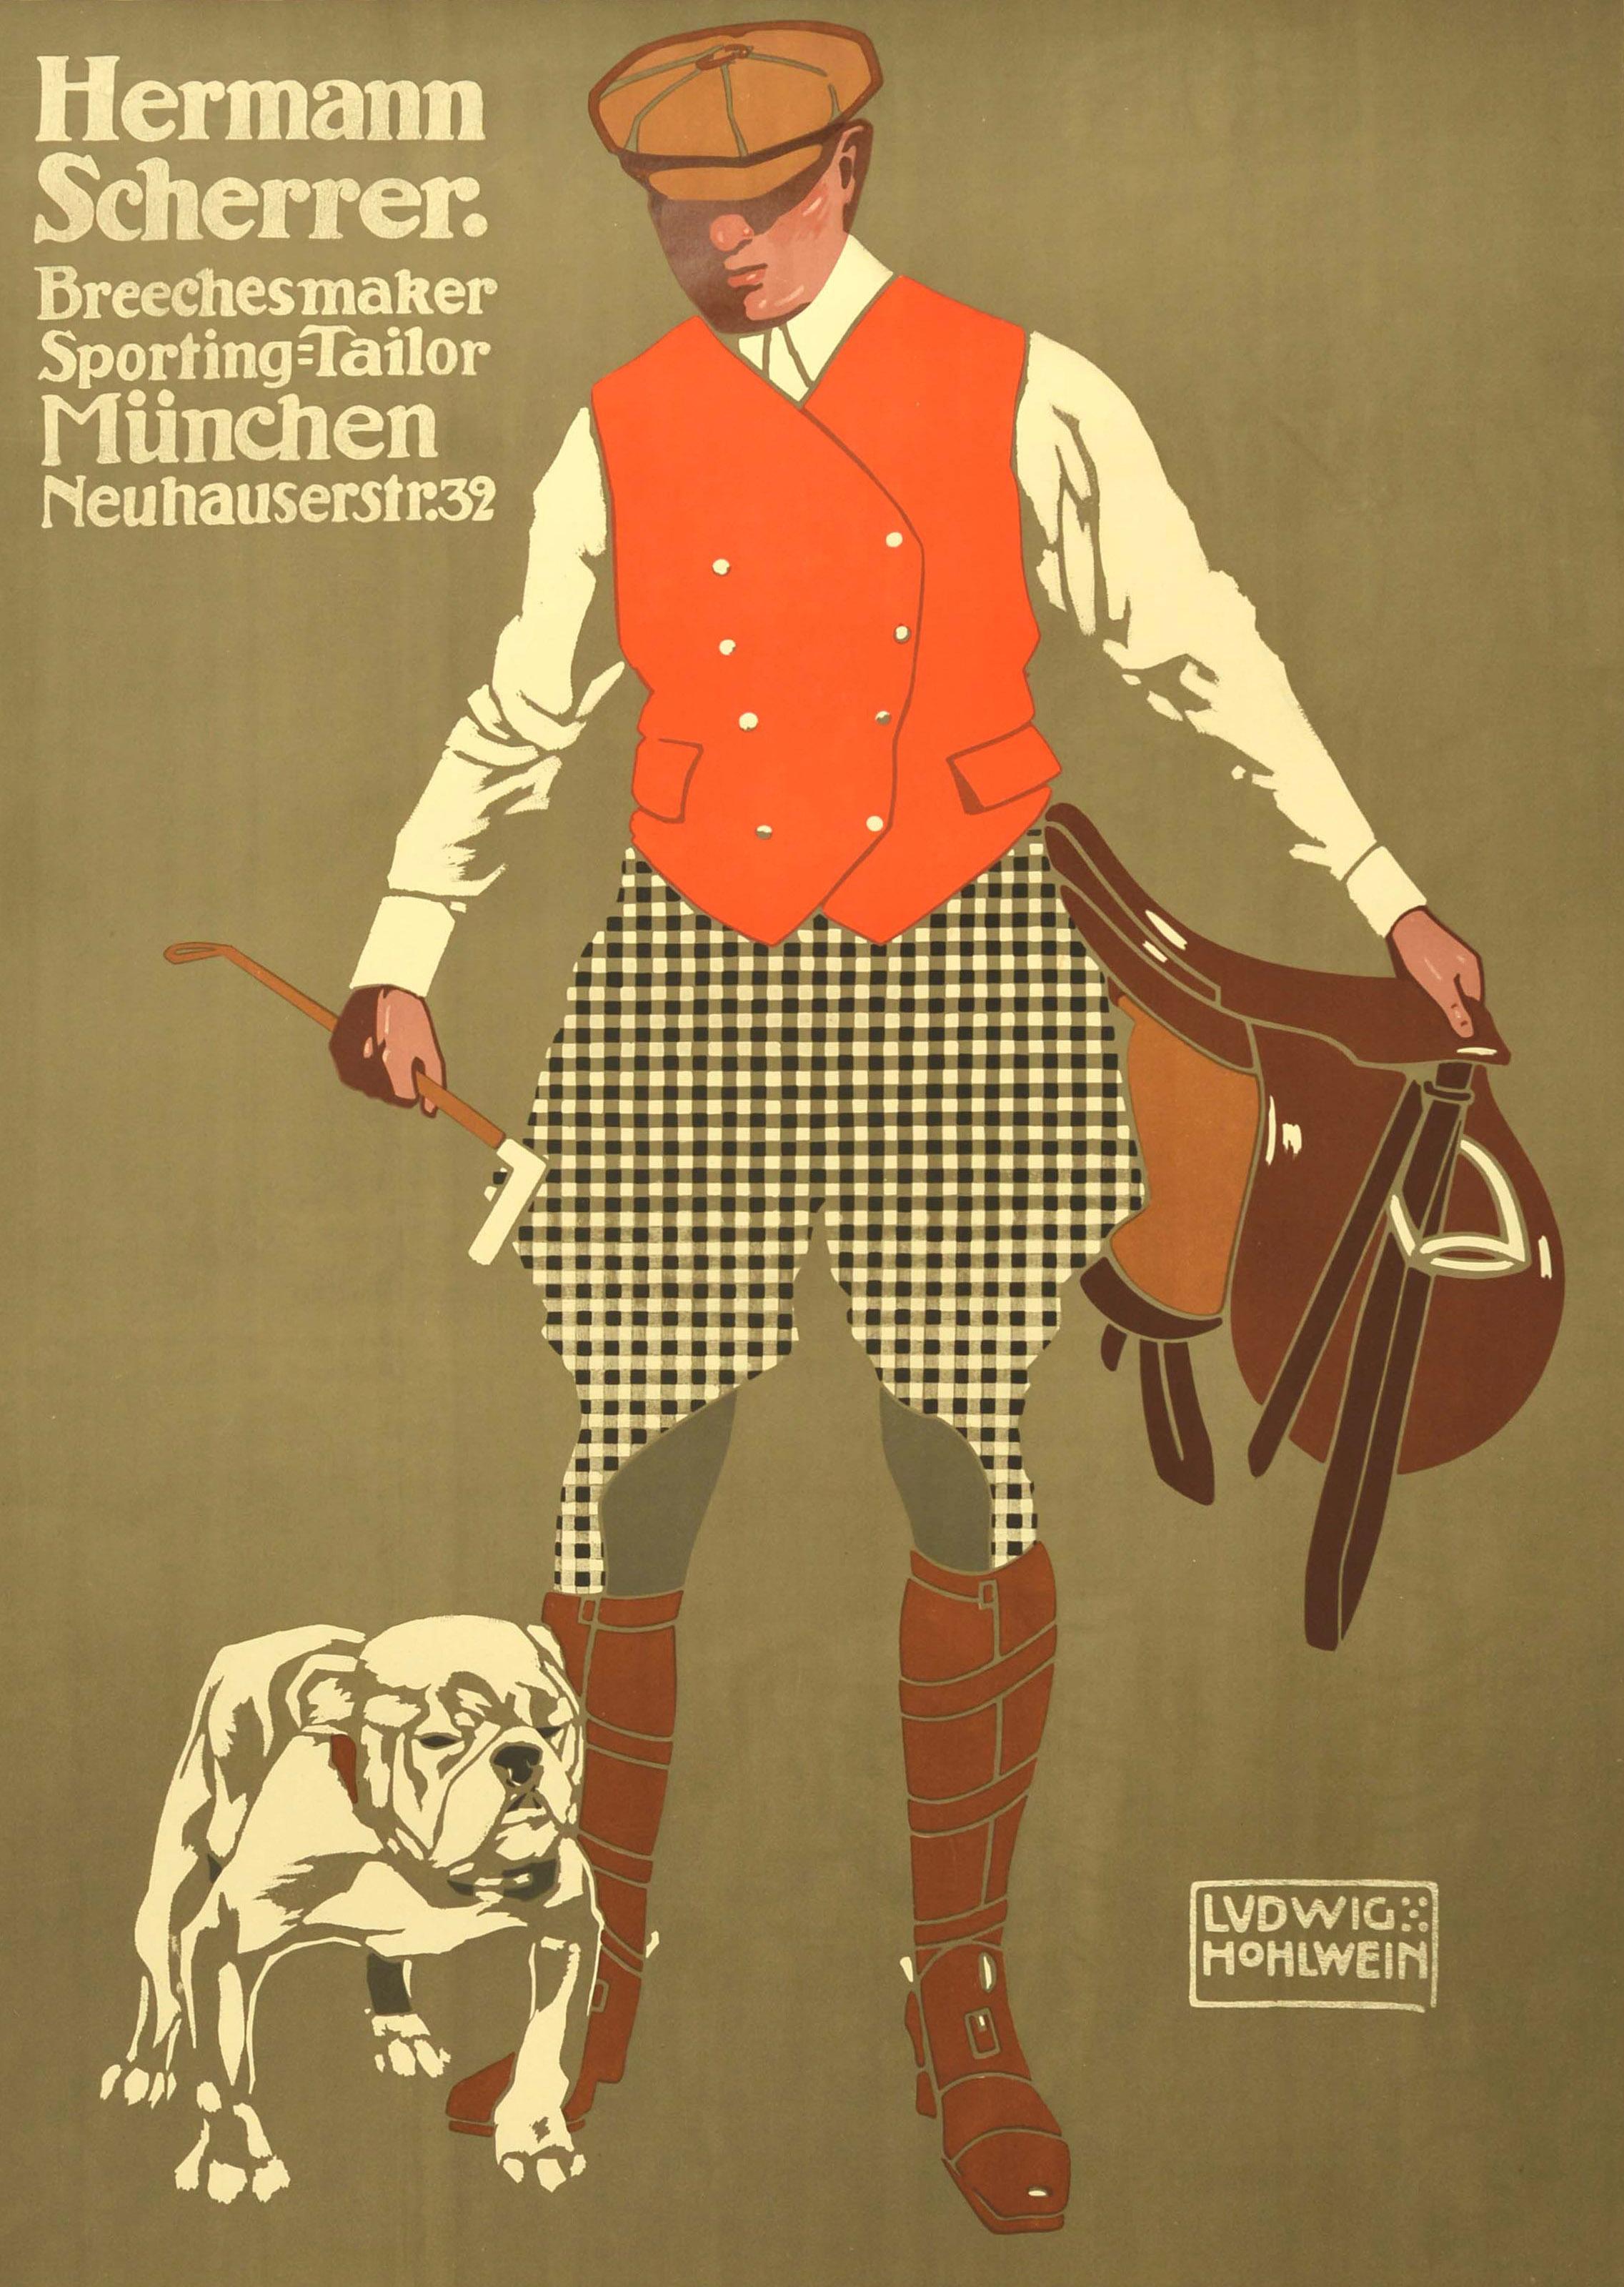 Original antique men's fashion and clothing advertising poster for Hermann Scherrer Breeches maker Sporting Tailor Munchen Neuhauser Strasse 32. Great artwork by the notable German graphic artist Ludwig Hohlwein (1874-1949) featuring a man carrying